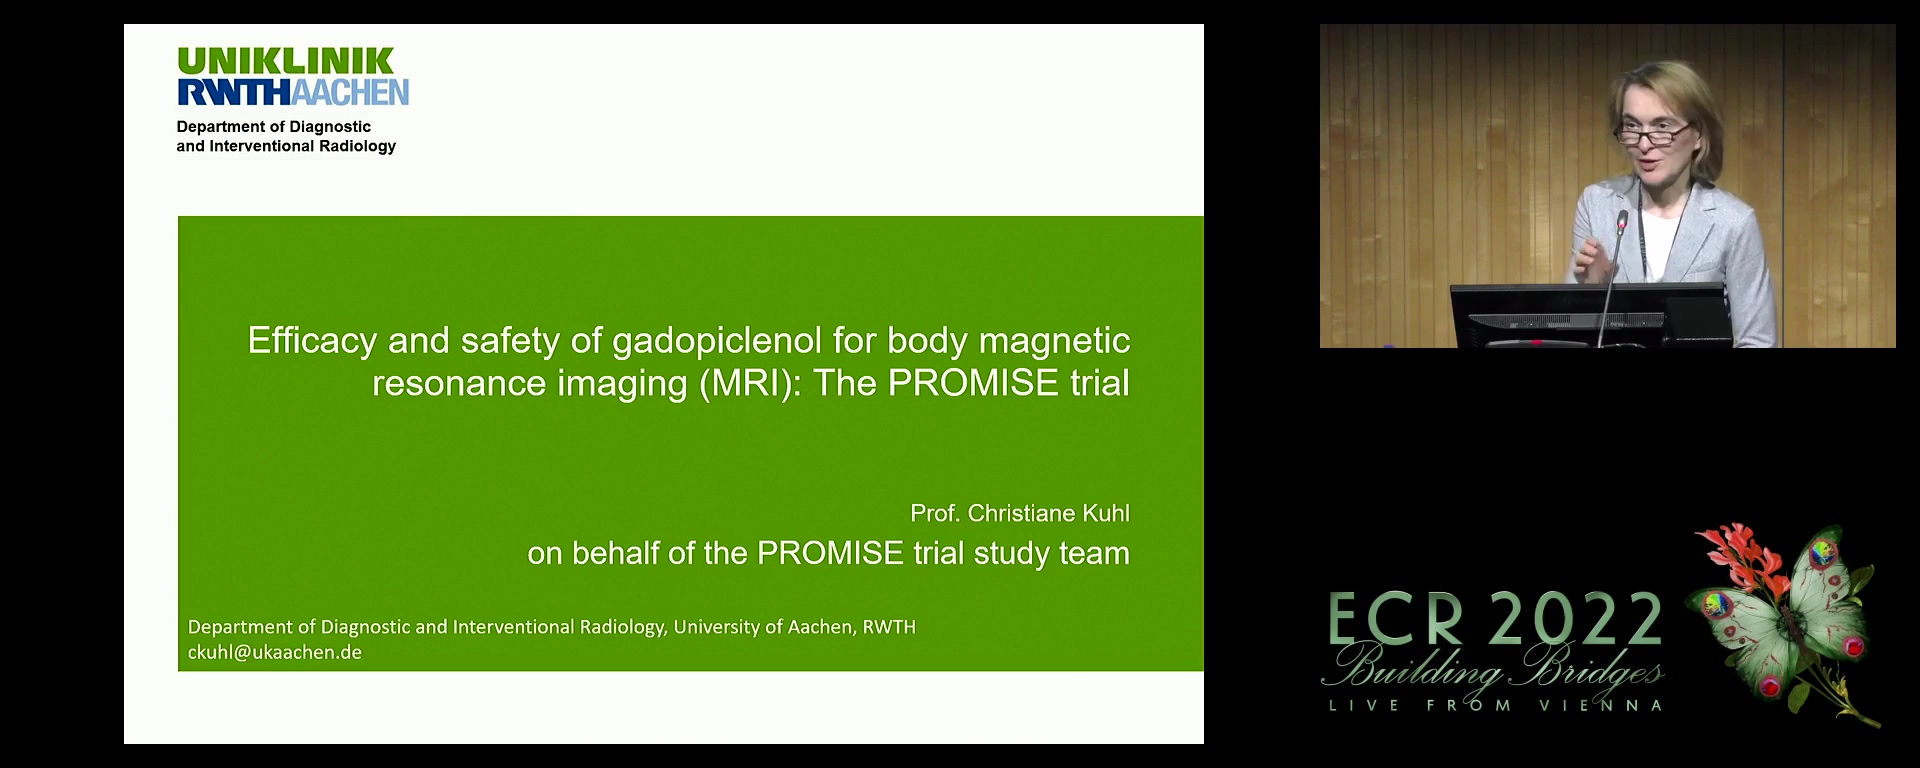 Efficacy and safety of gadopiclenol for body magnetic-resonance imaging (MRI): the PROMISE trial